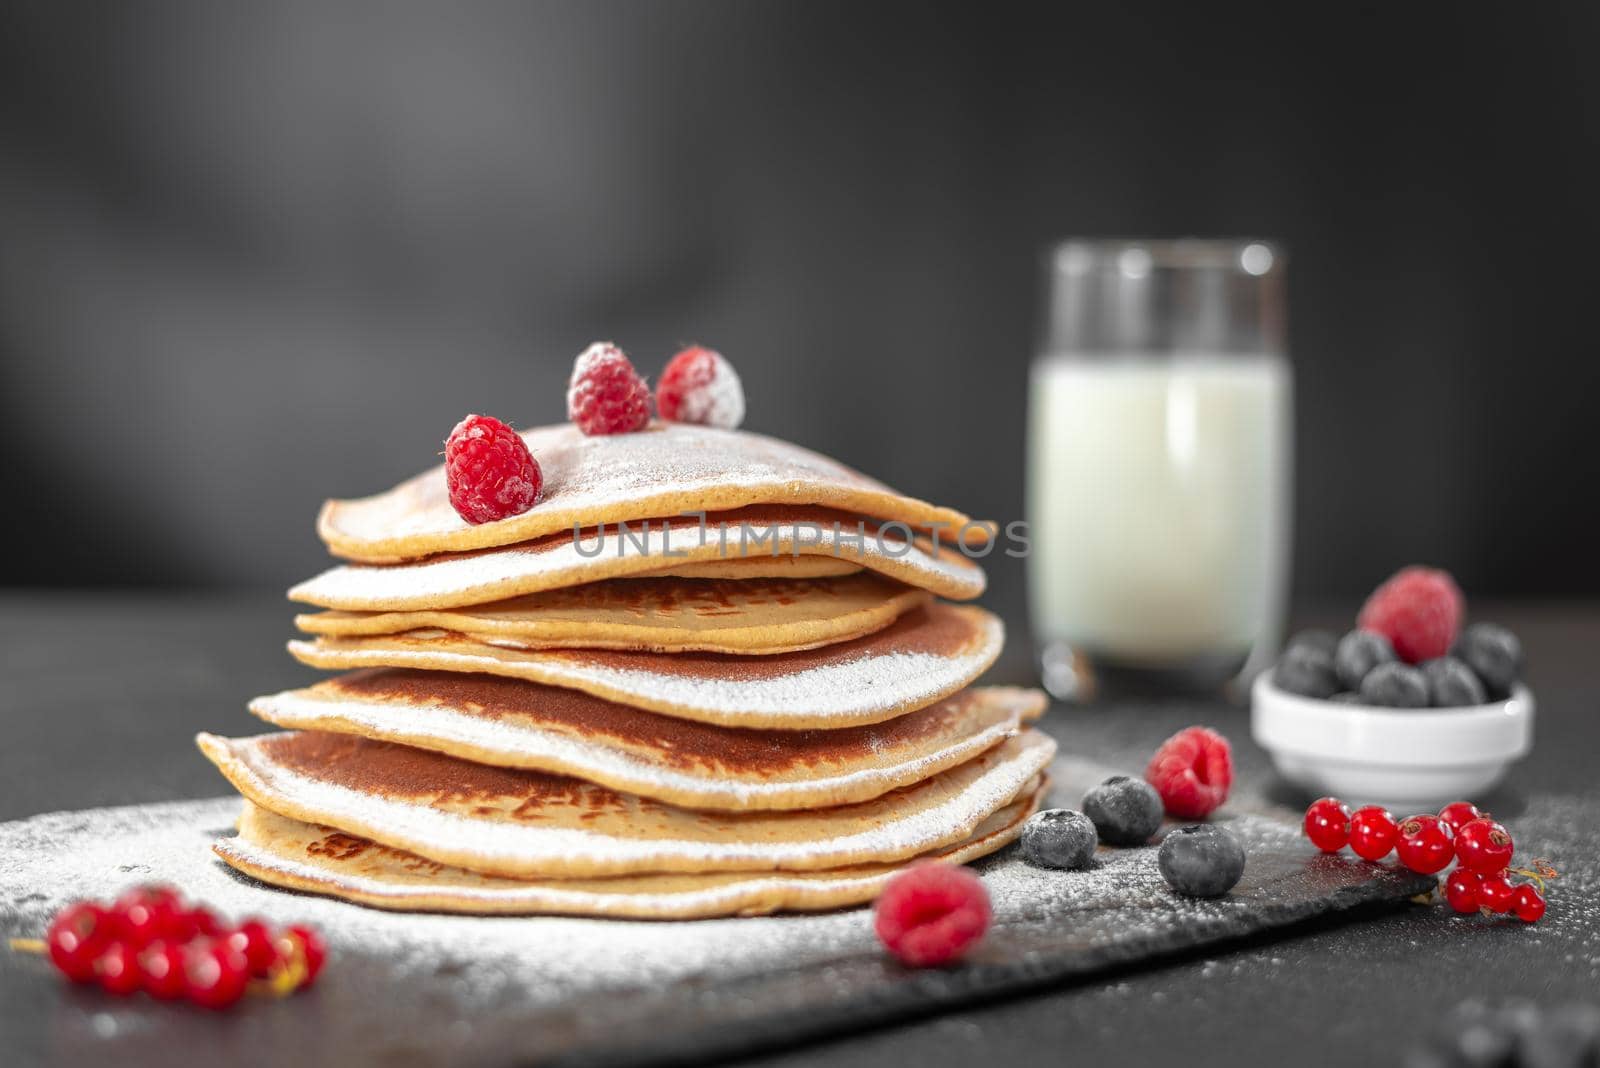 Serving pancakes with powdered sugar and berries. Chef man hand. Beautiful food still life. Natural light, slightly toned image, dark black background with text area. Horizontal view